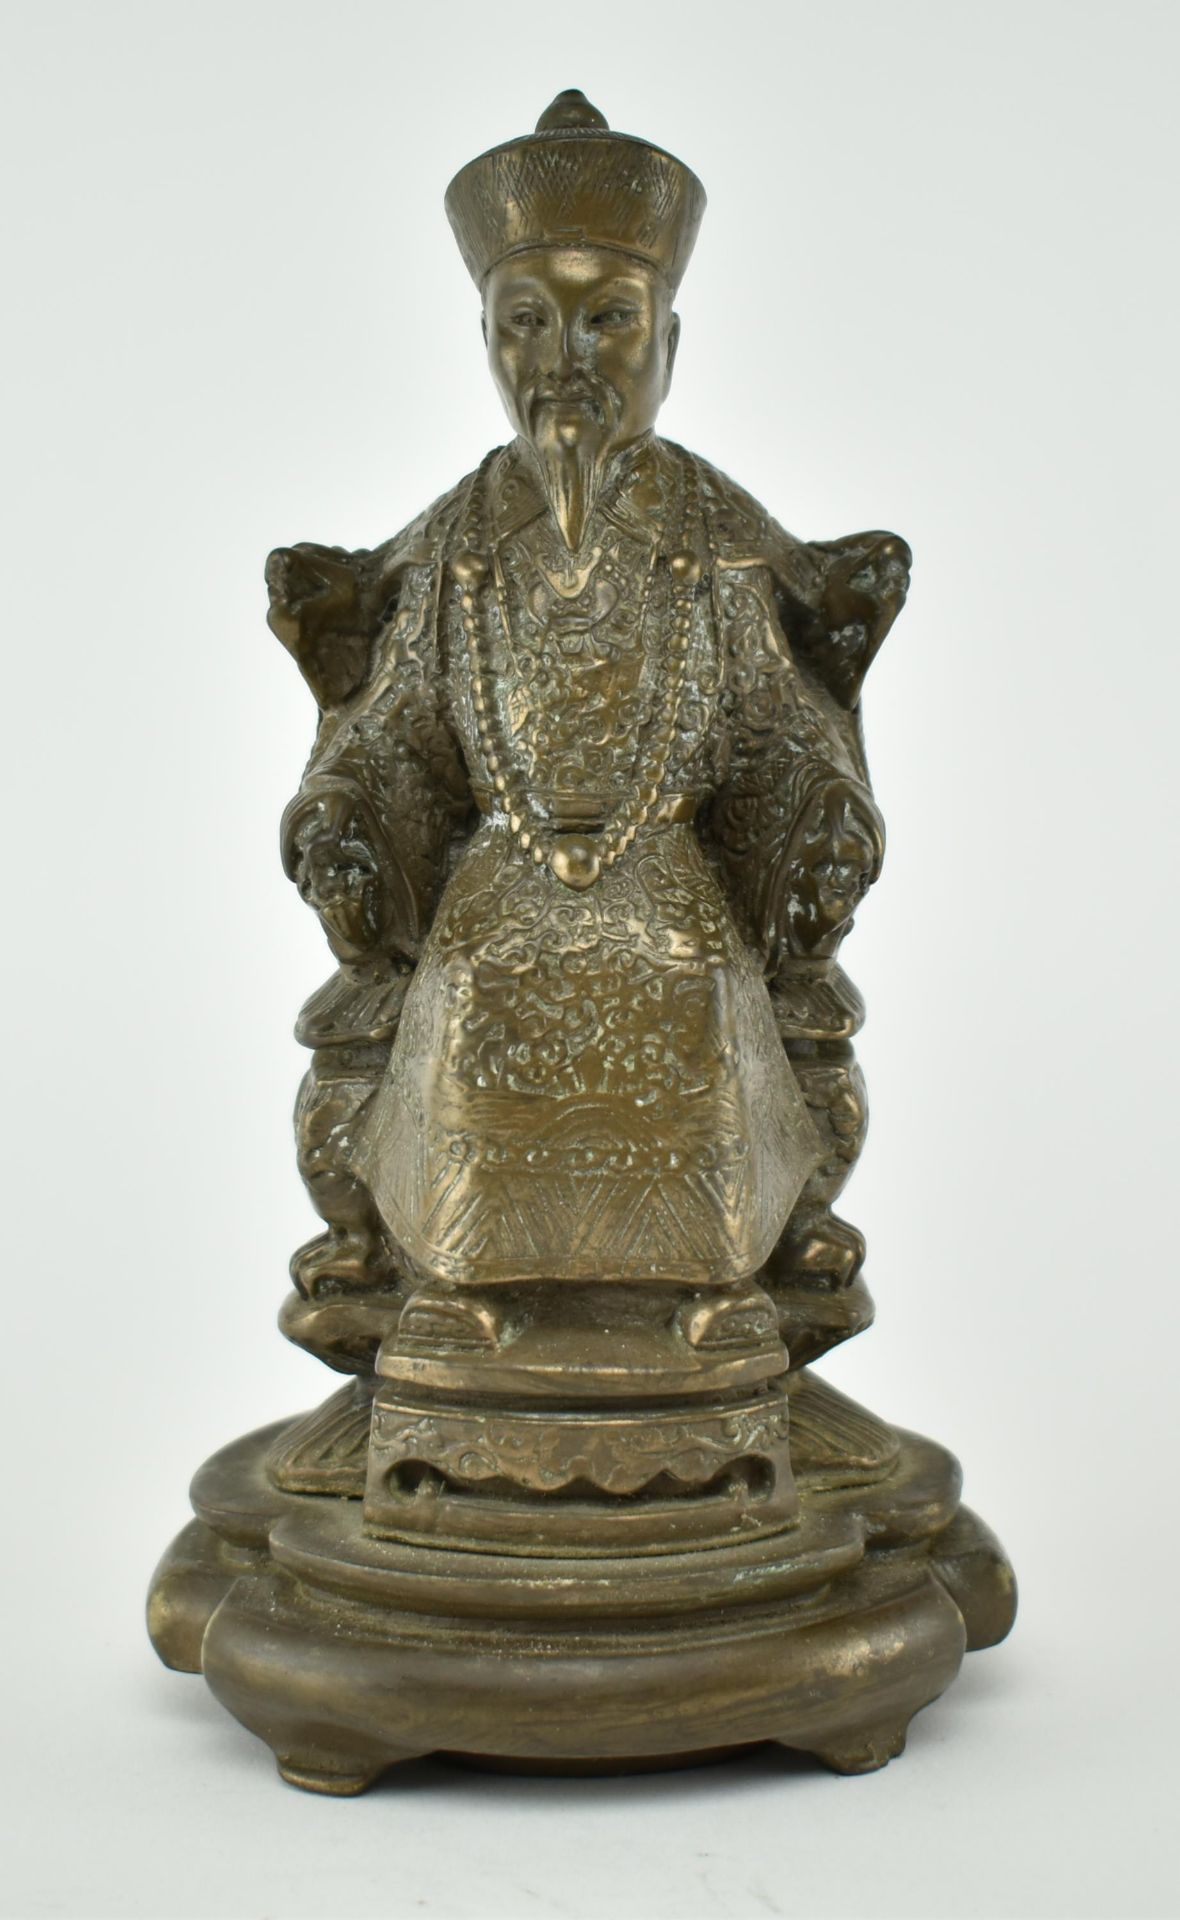 20TH CENTURY CHINESE BRONZE SCULPTURE OF AN EMPERIOR